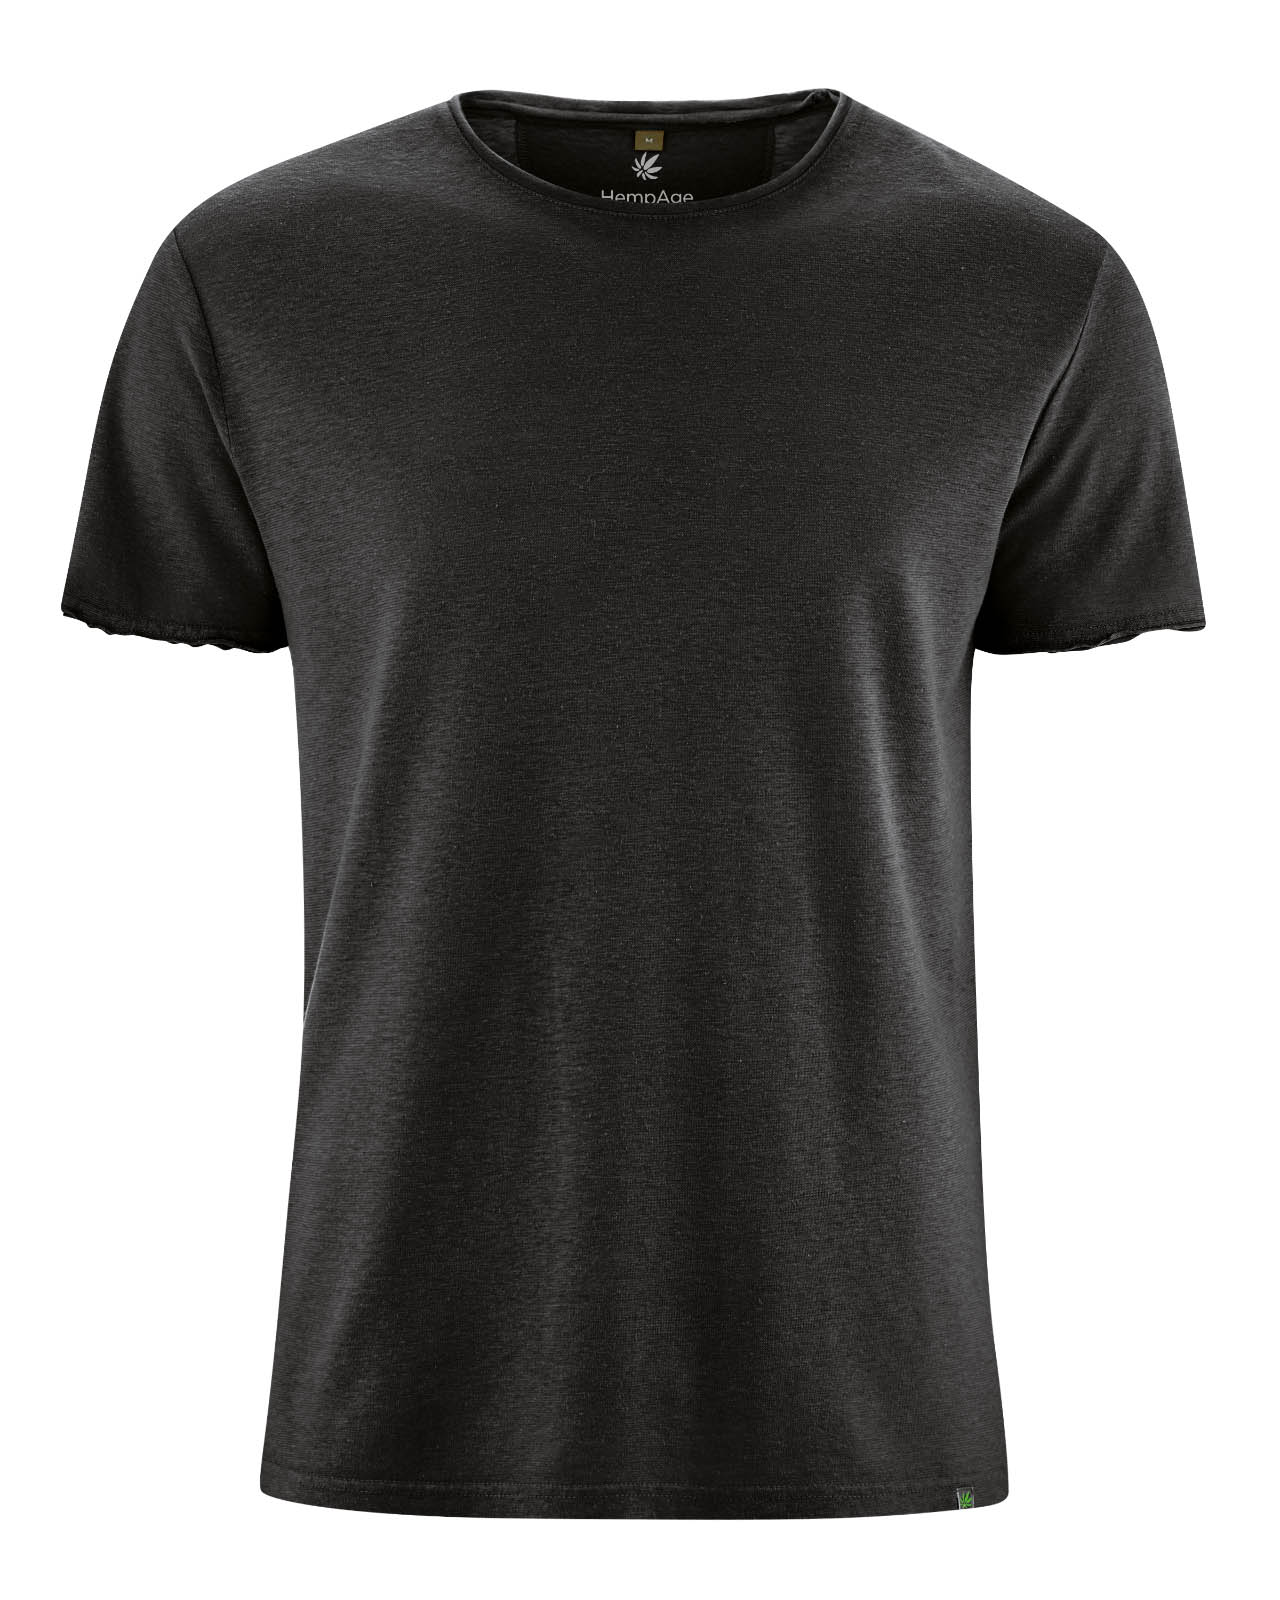 DH832 t-shirt with rolling cuffs, jersey